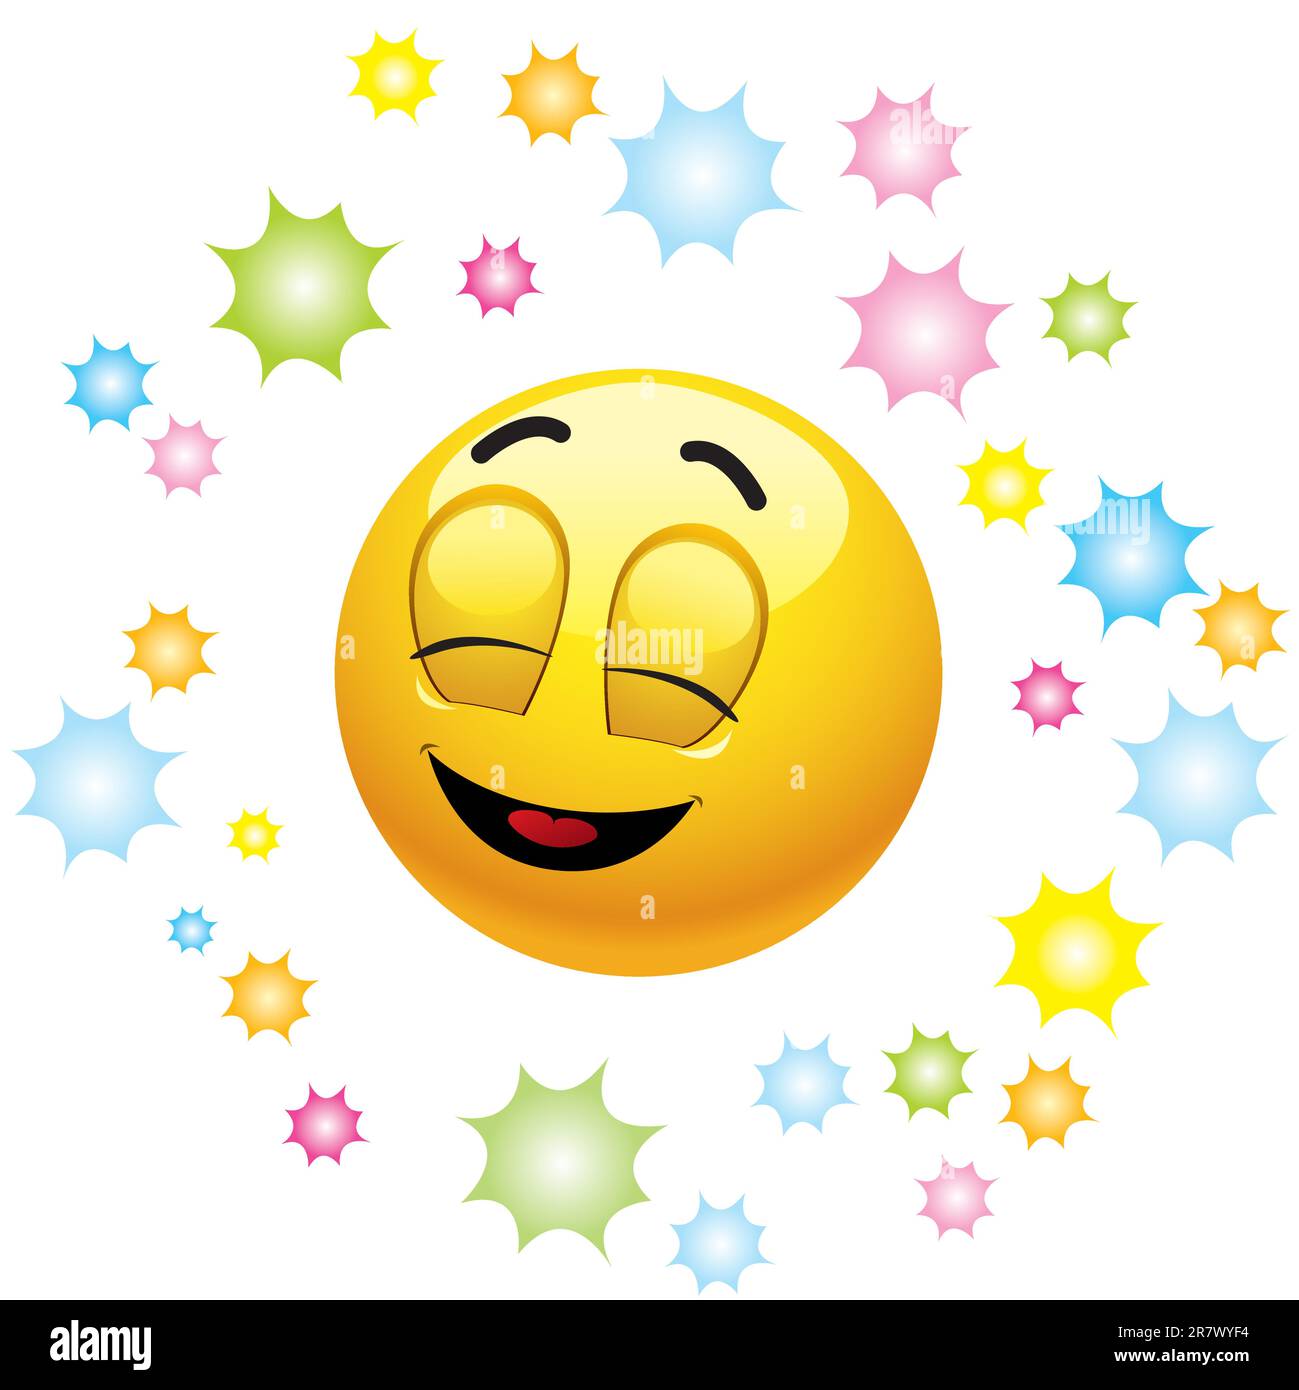 Smiling ball being happy and enjoying Stock Vector